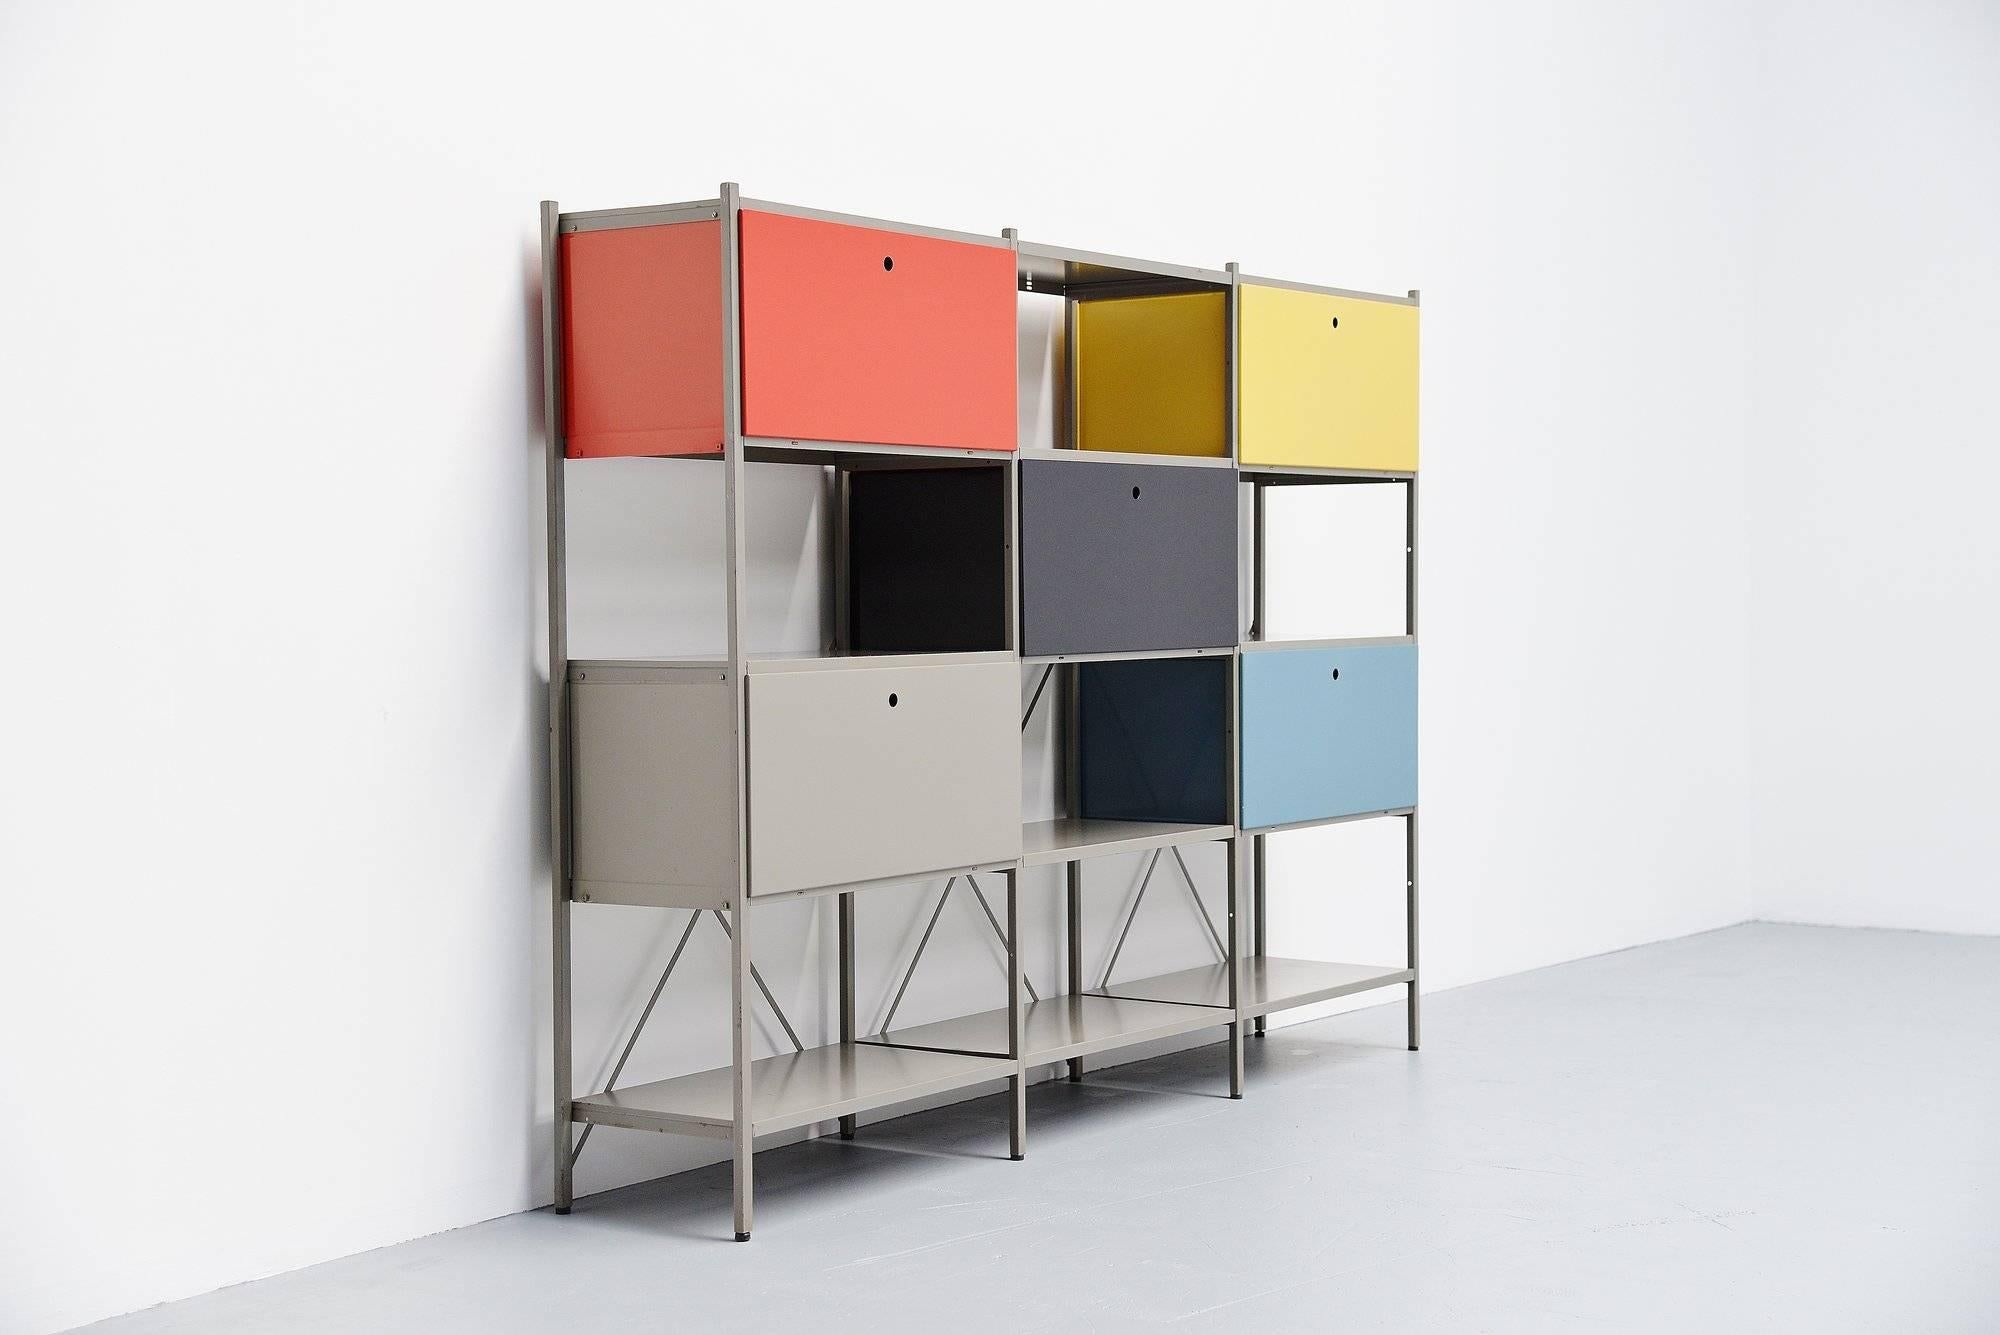 Impressive industrial bookcase model 663, wall unit or room divider designed by Wim Rietveld (1924-1985) son of Gerrit Thomas Rietveld, for Gispen Culemborg in 1954. A very nice modular wall unit that can be built by your own taste and needs. This